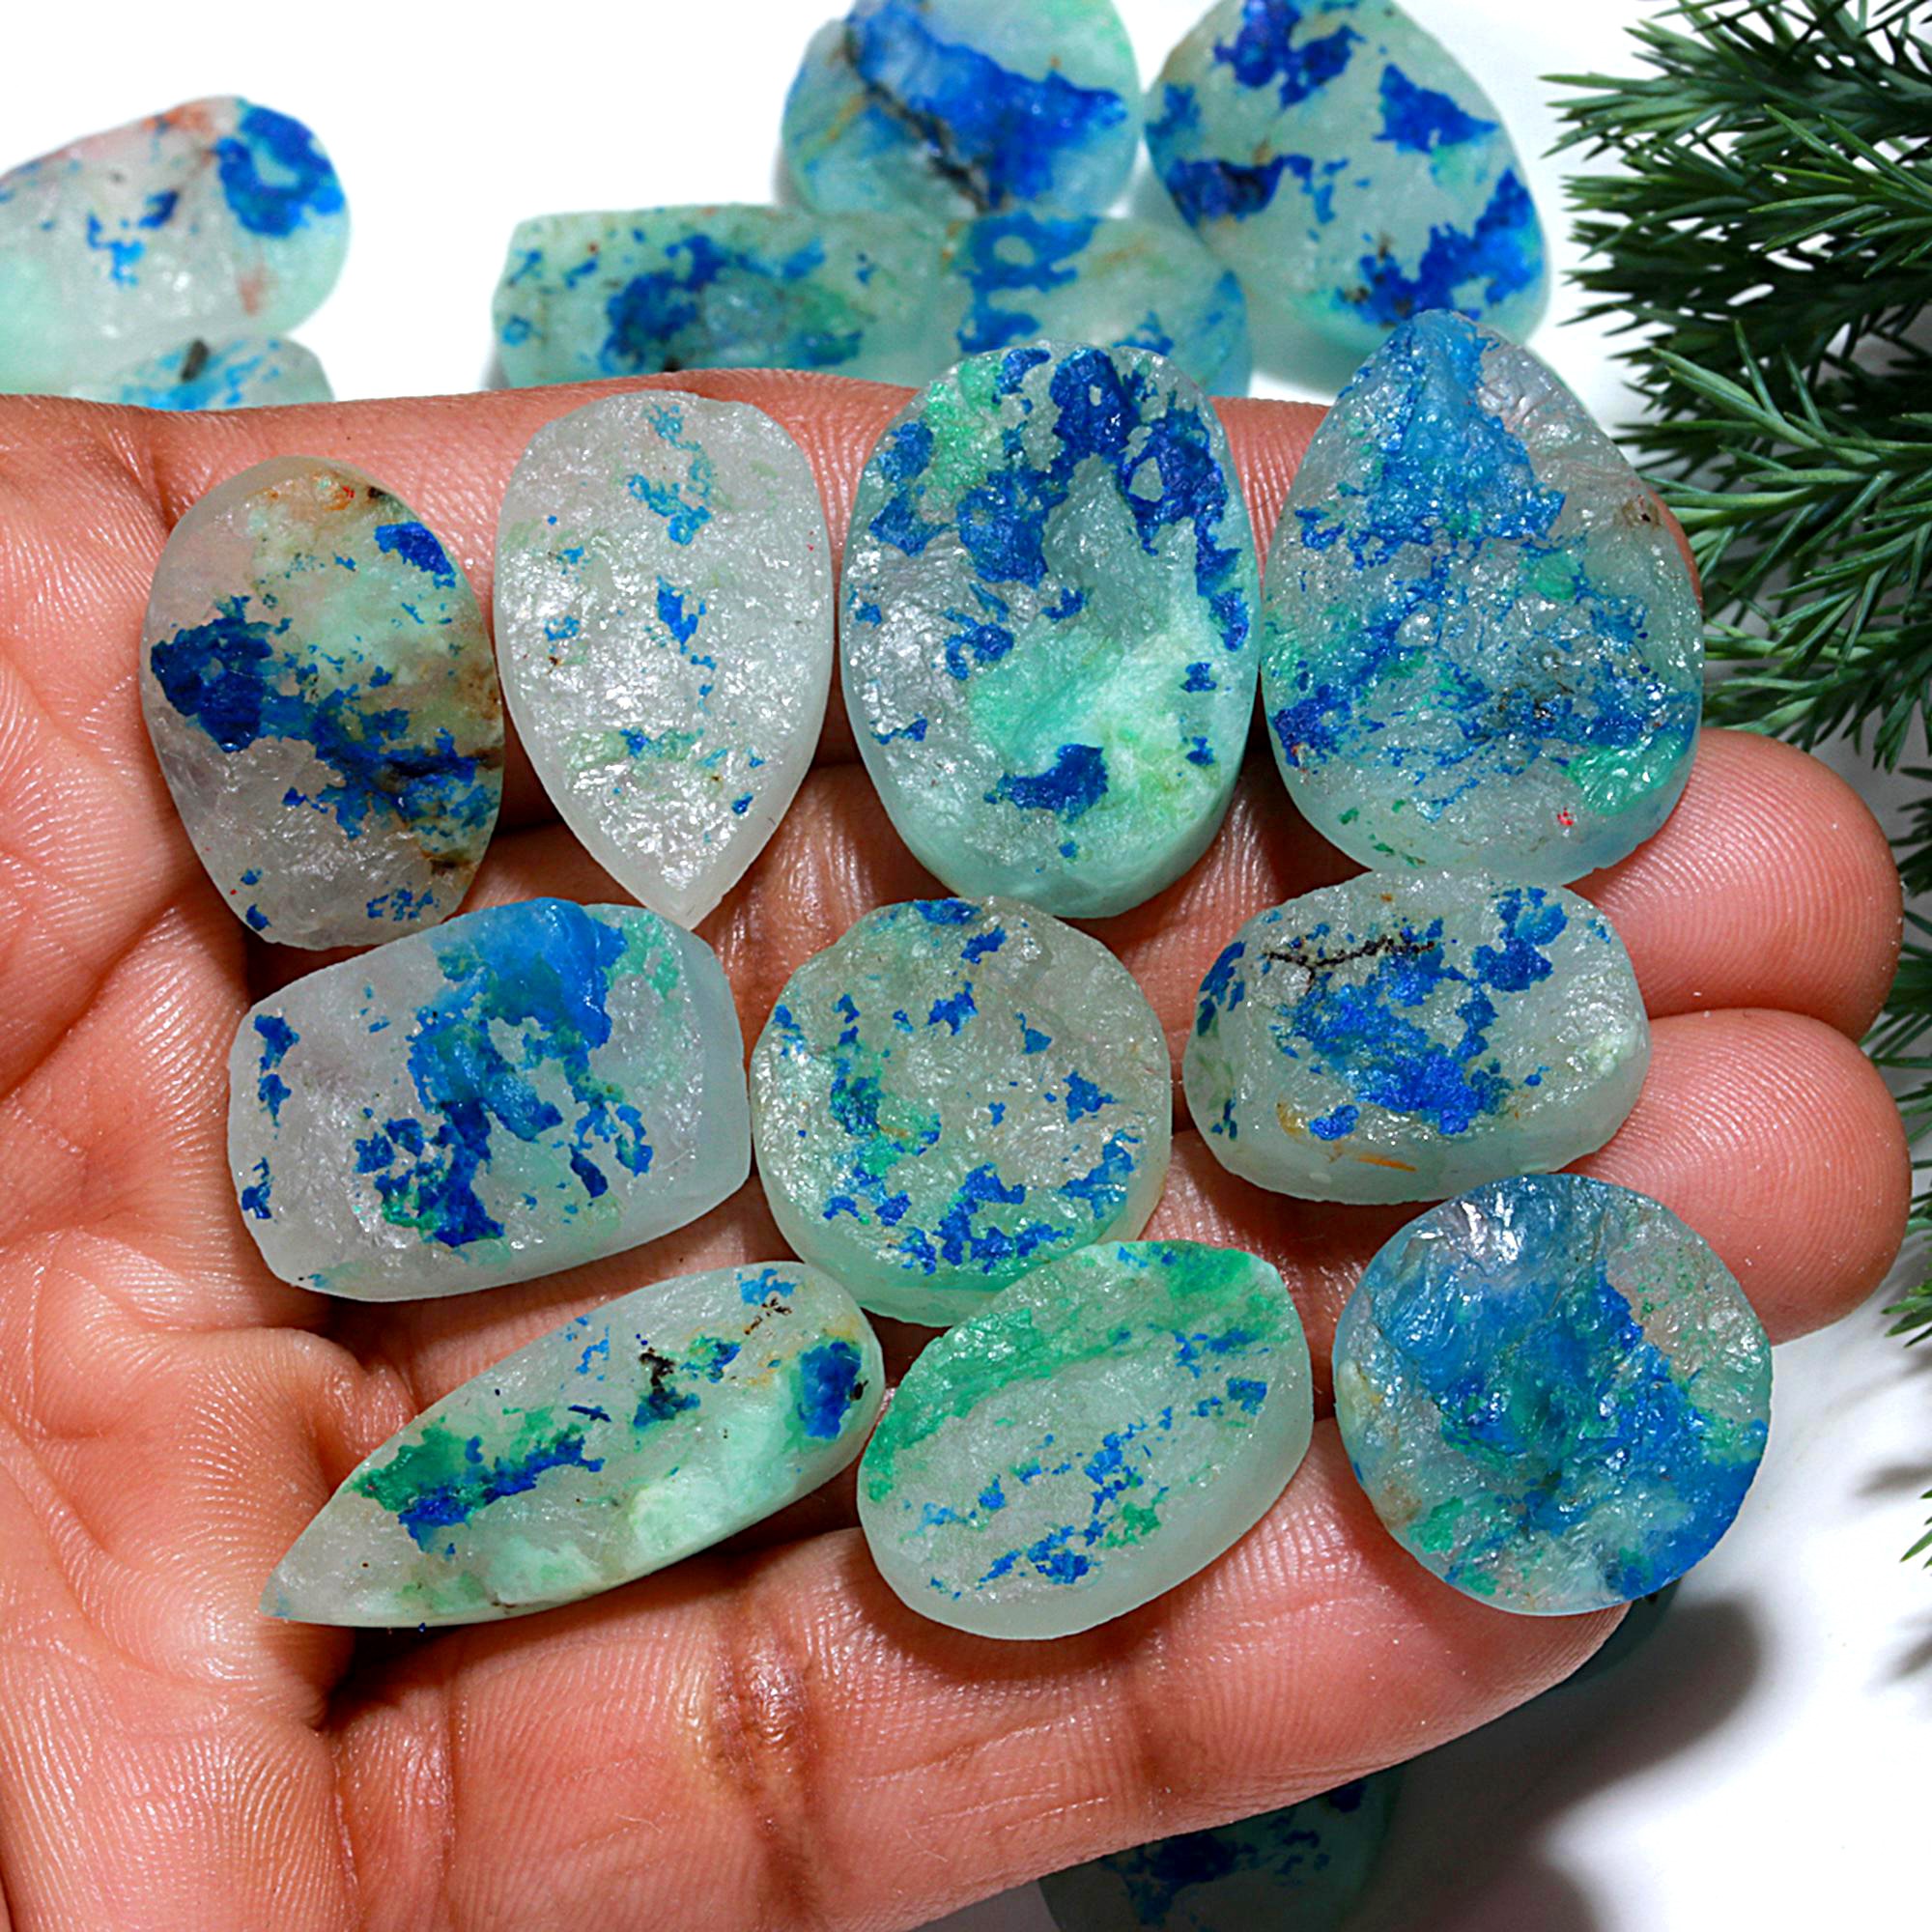 48 Pcs 573.Cts Natural Azurite Druzy Unpolished Loose Cabochon Gemstone For Jewelry Wholesale Lot Size 27x13 17x12mm